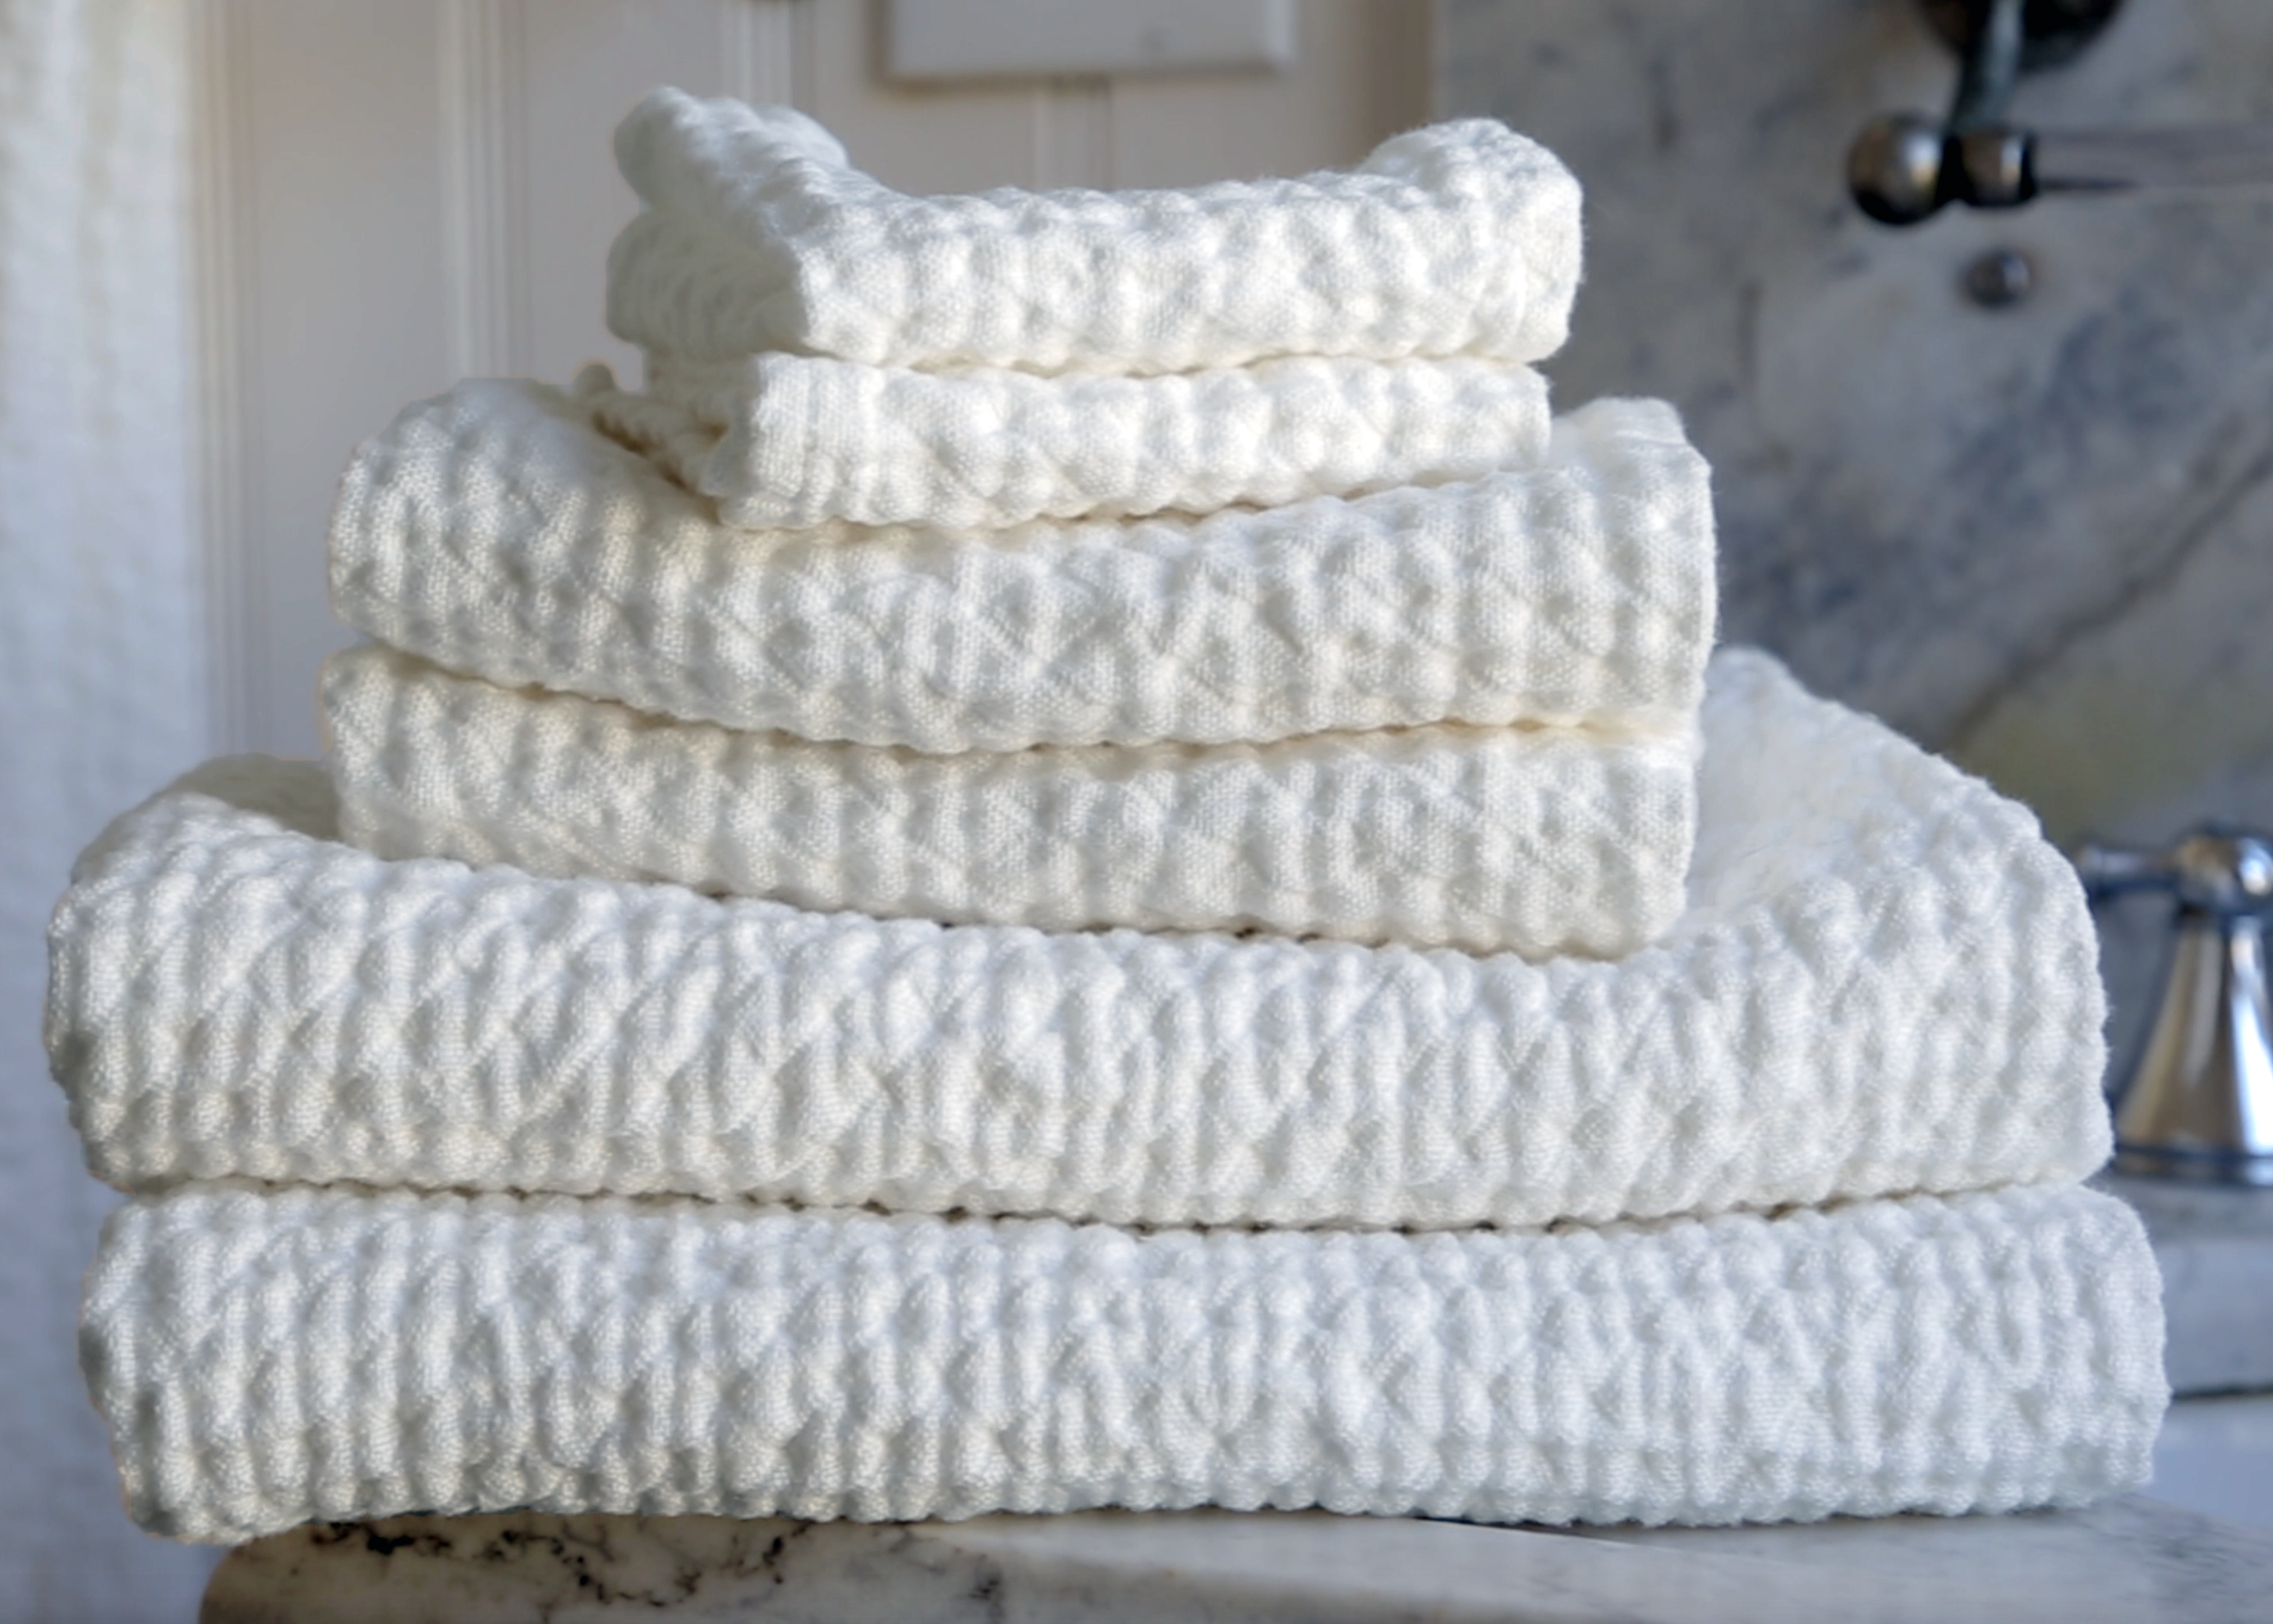 Load video: JoAnne Chirico, Founder of Goodlinens talks us through why she fell in love with linen and how Goodlinens towels will elevate your daily routines.